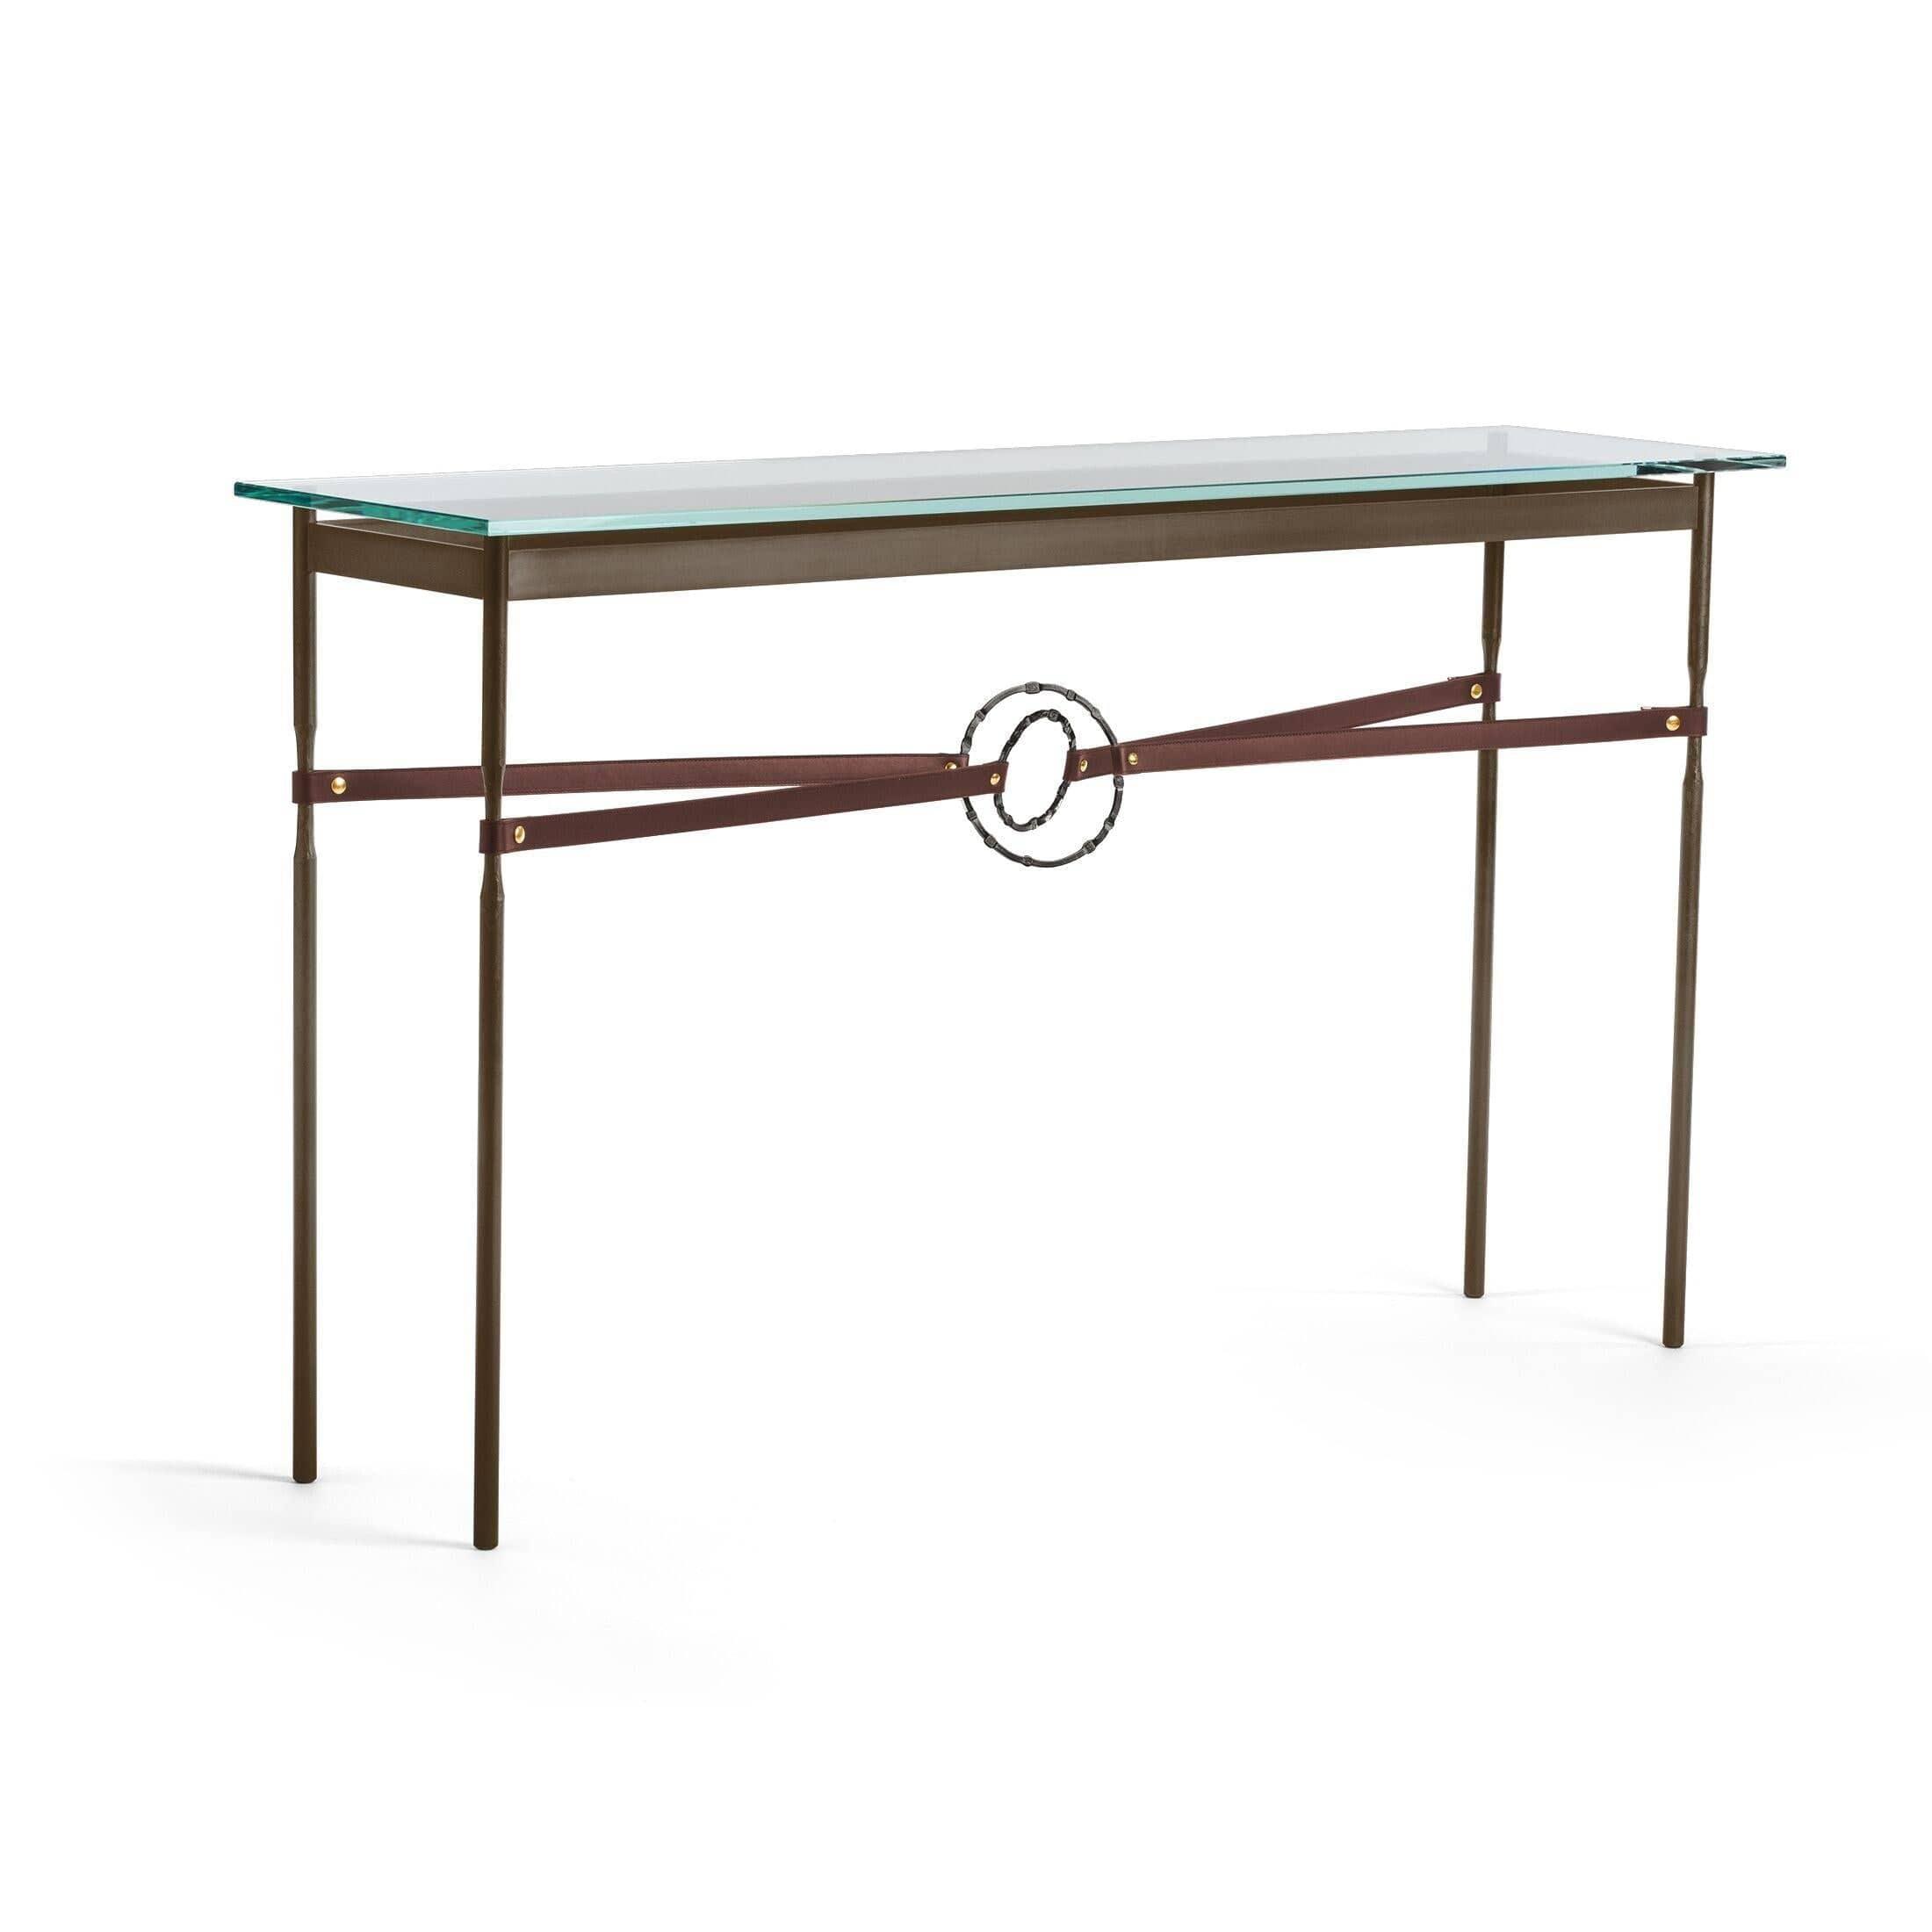 Hubbardton Forge - Equus Brown Leather Console Table - 750118-05-07-LB-VA0714 | Montreal Lighting & Hardware